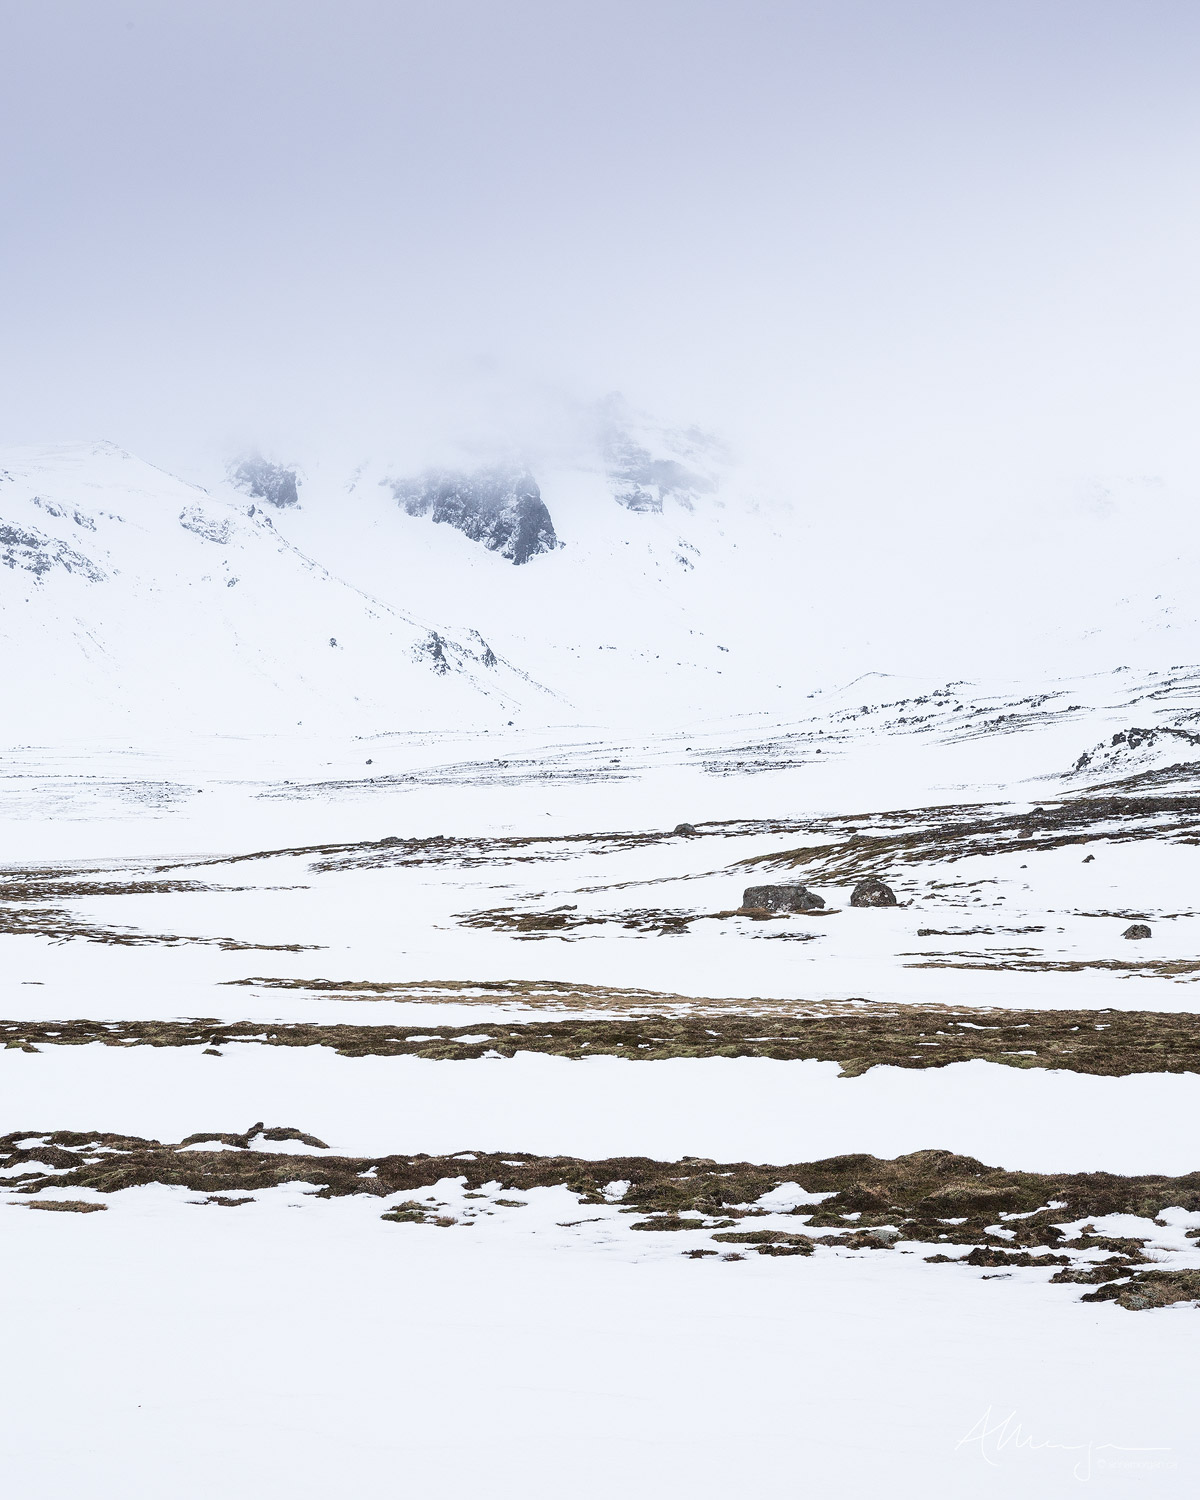 Snow covers the volcanic and stark landscape in Iceland